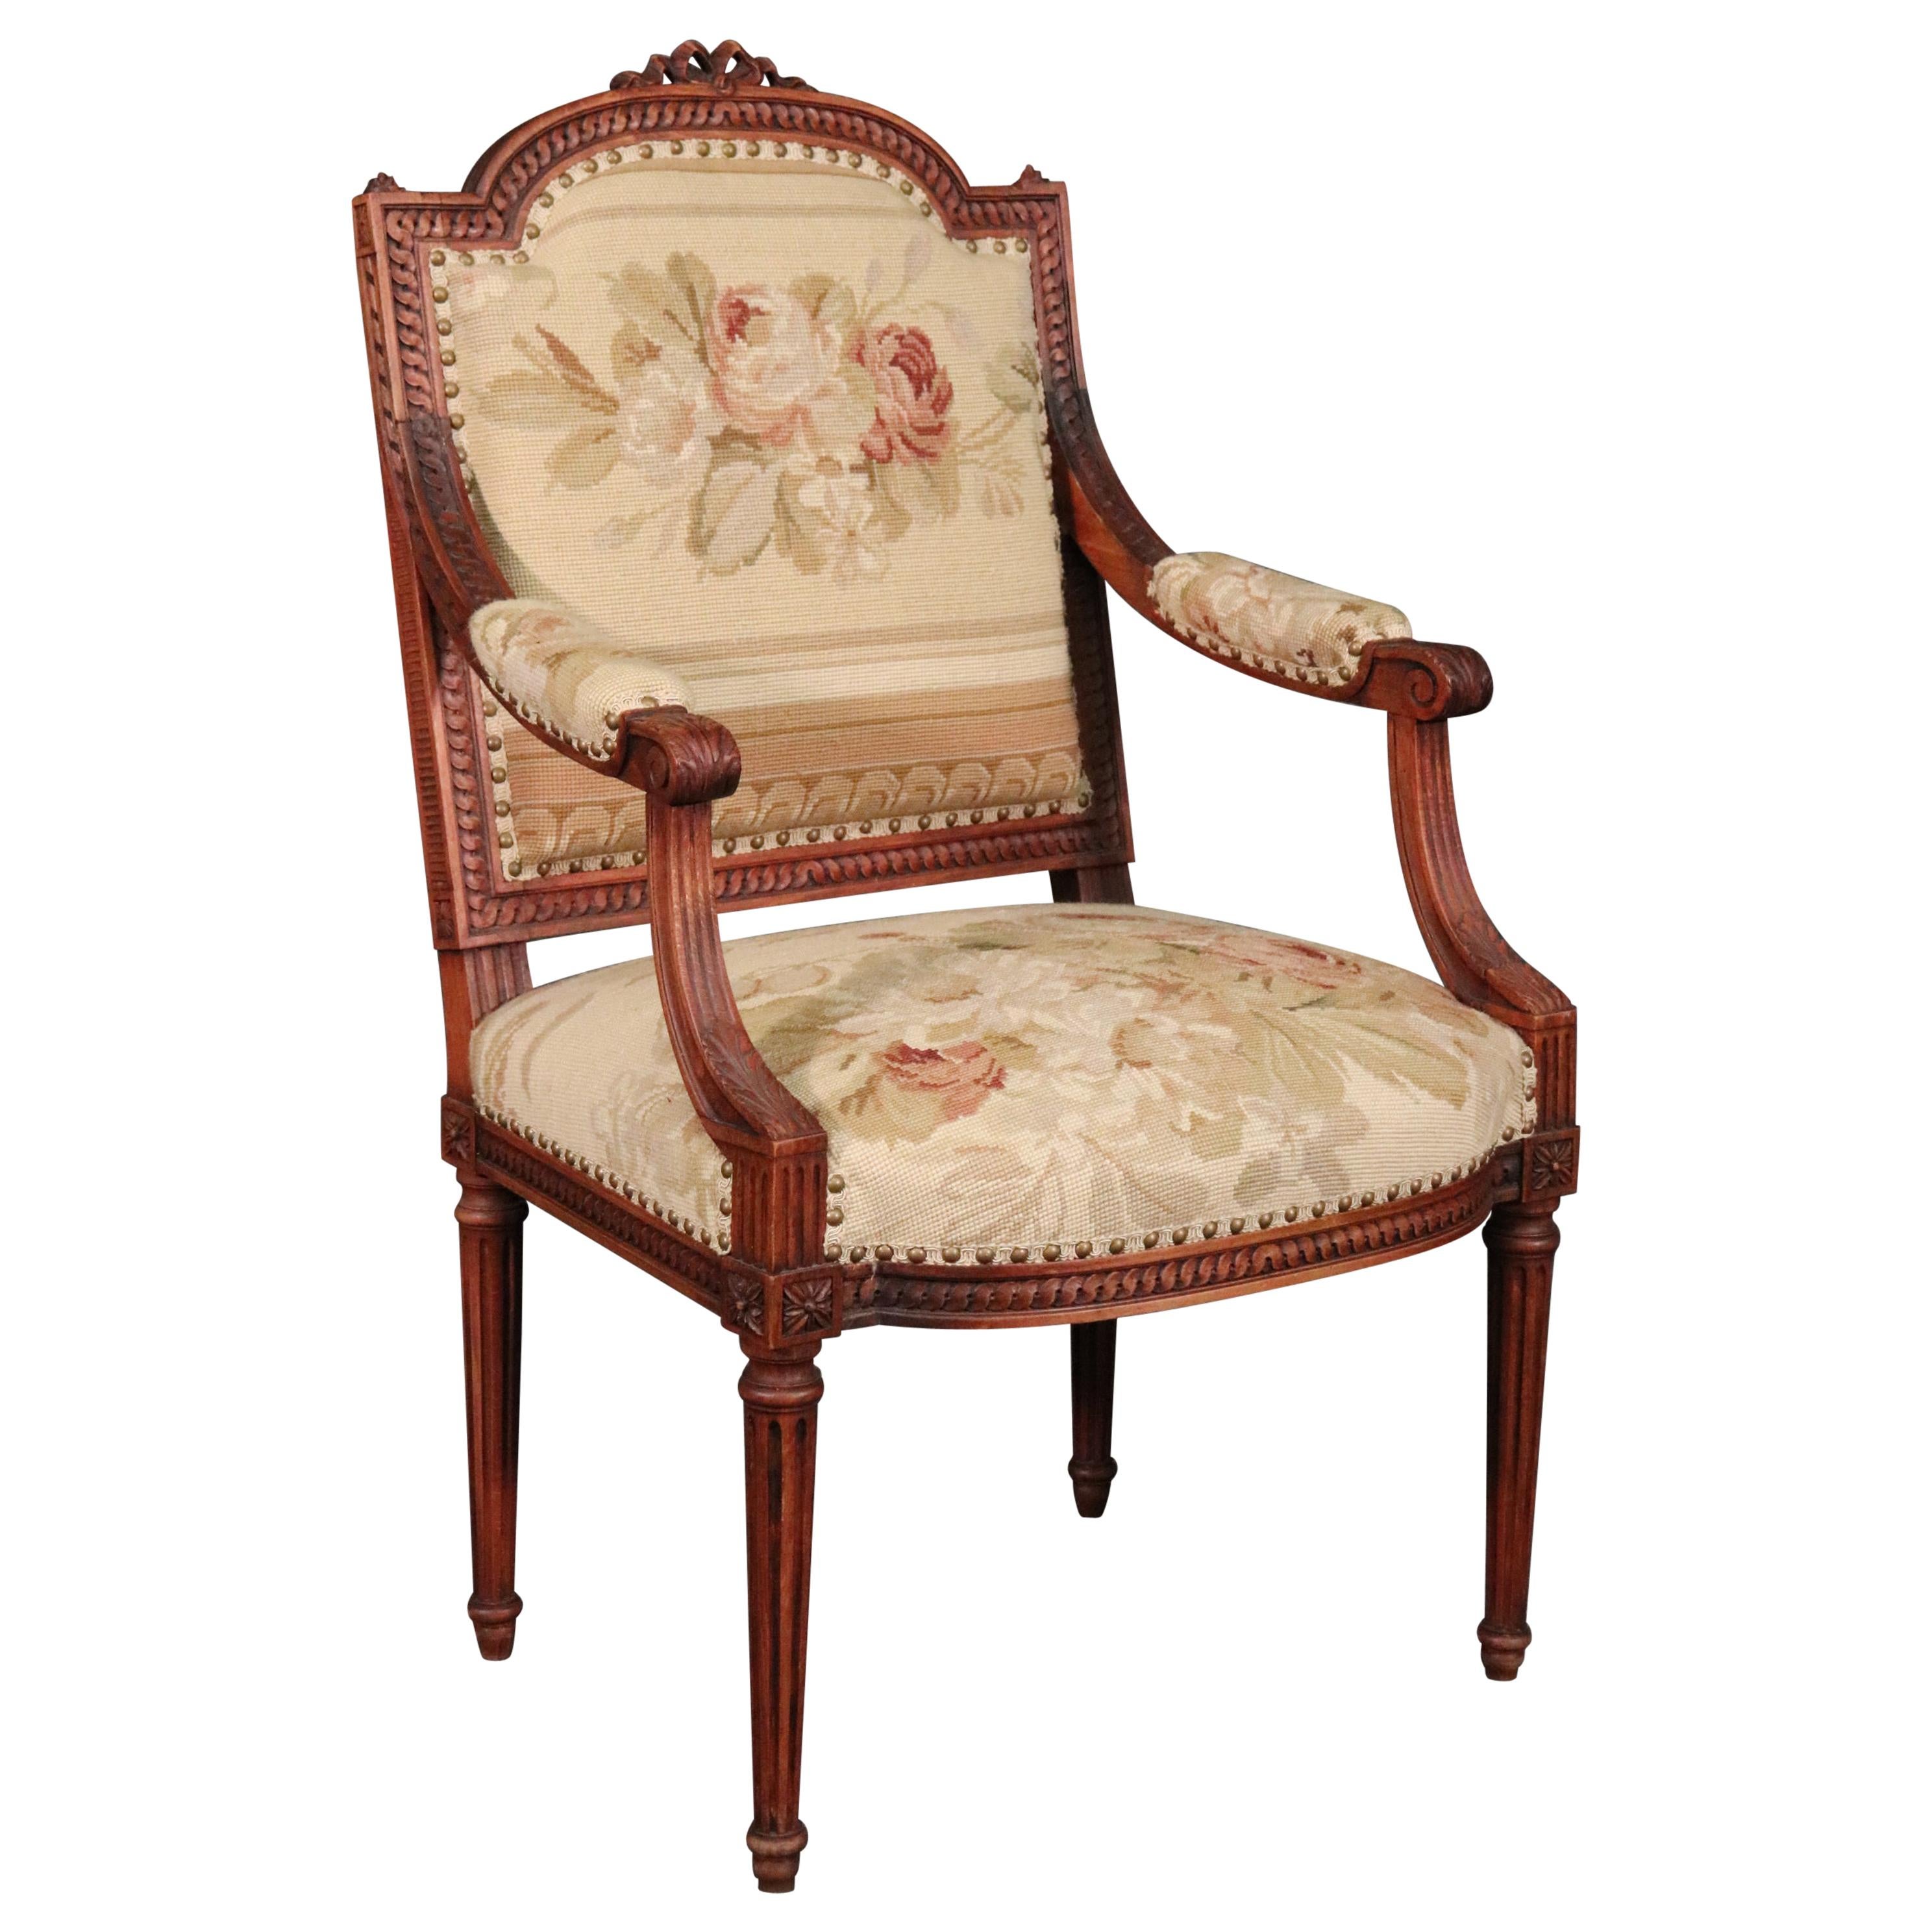 French Louis XVI Needlepoint Fauteuil Armchair in Walnut, circa 1890 For Sale